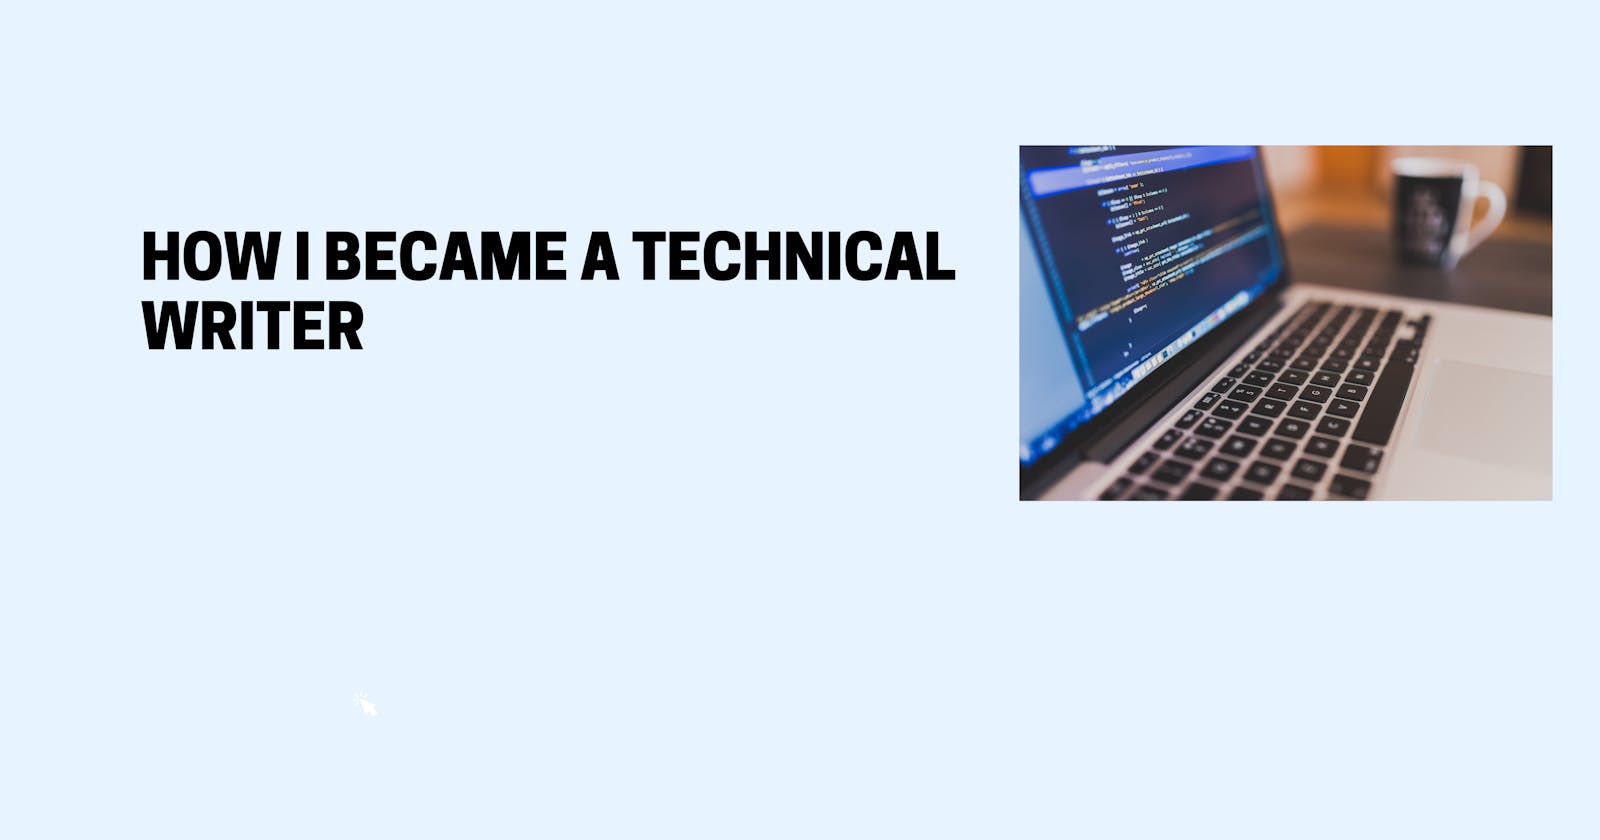 How I became a technical writer